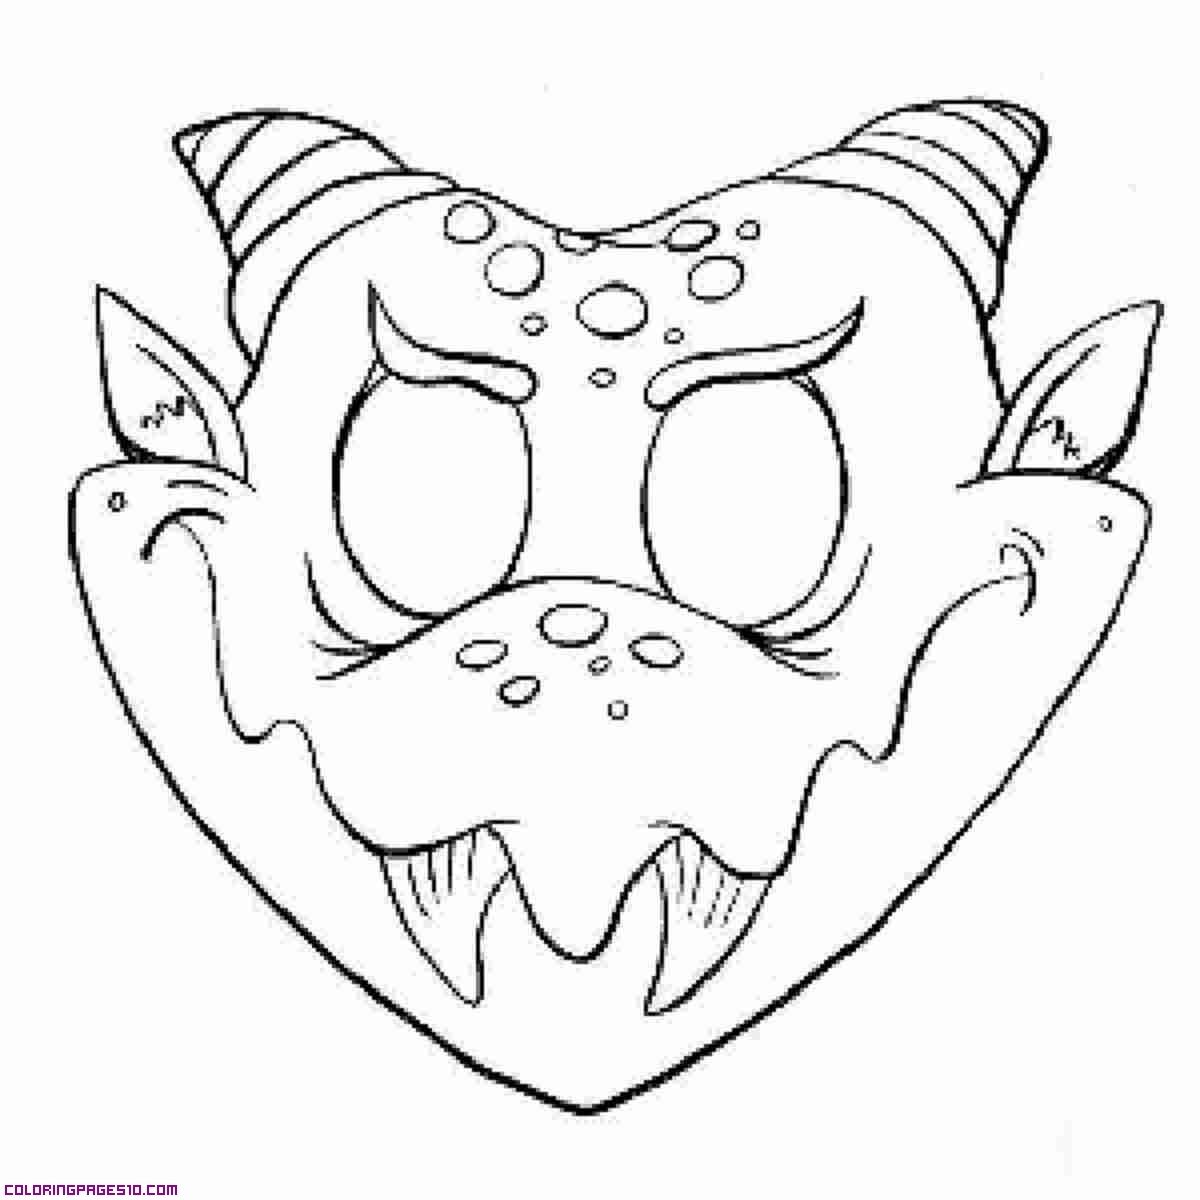 Free Halloween Scary Masks Coloring Pages, Download Free Halloween Scary Masks  Coloring Pages png images, Free ClipArts on Clipart Library